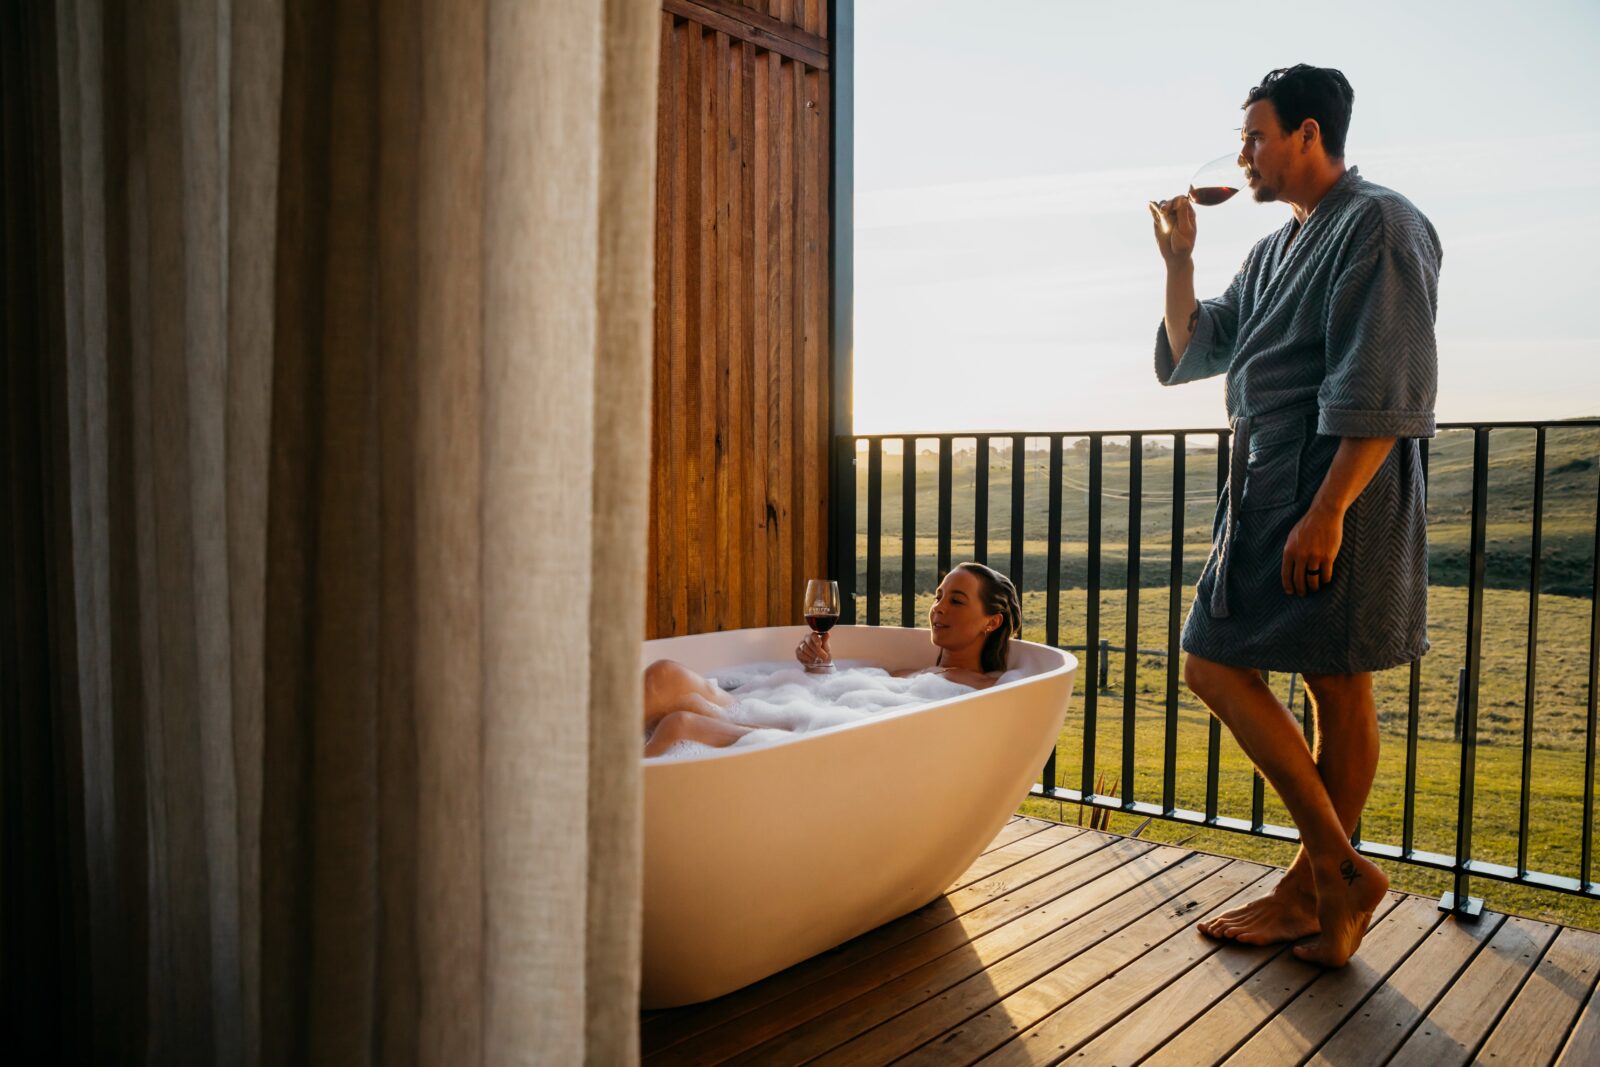 Woman enjoys outdoor bathtub drinking wine, man looking at the view drinking red wine.